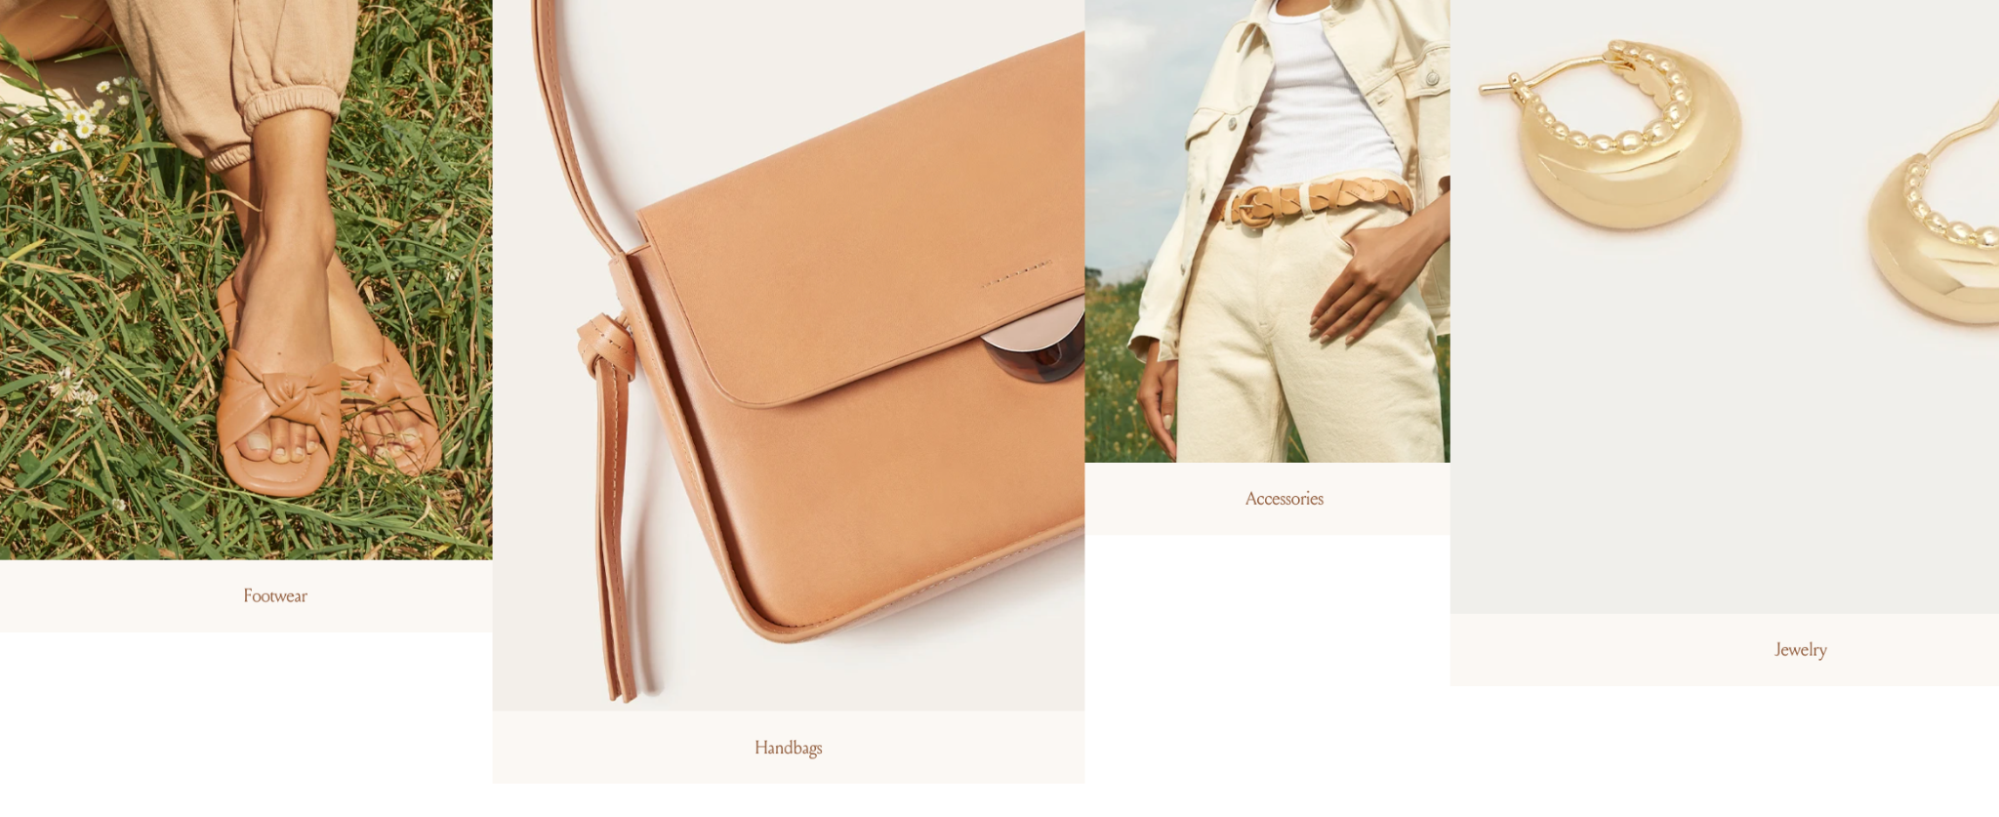 The difference modules we've created for Loeffler Randall's website